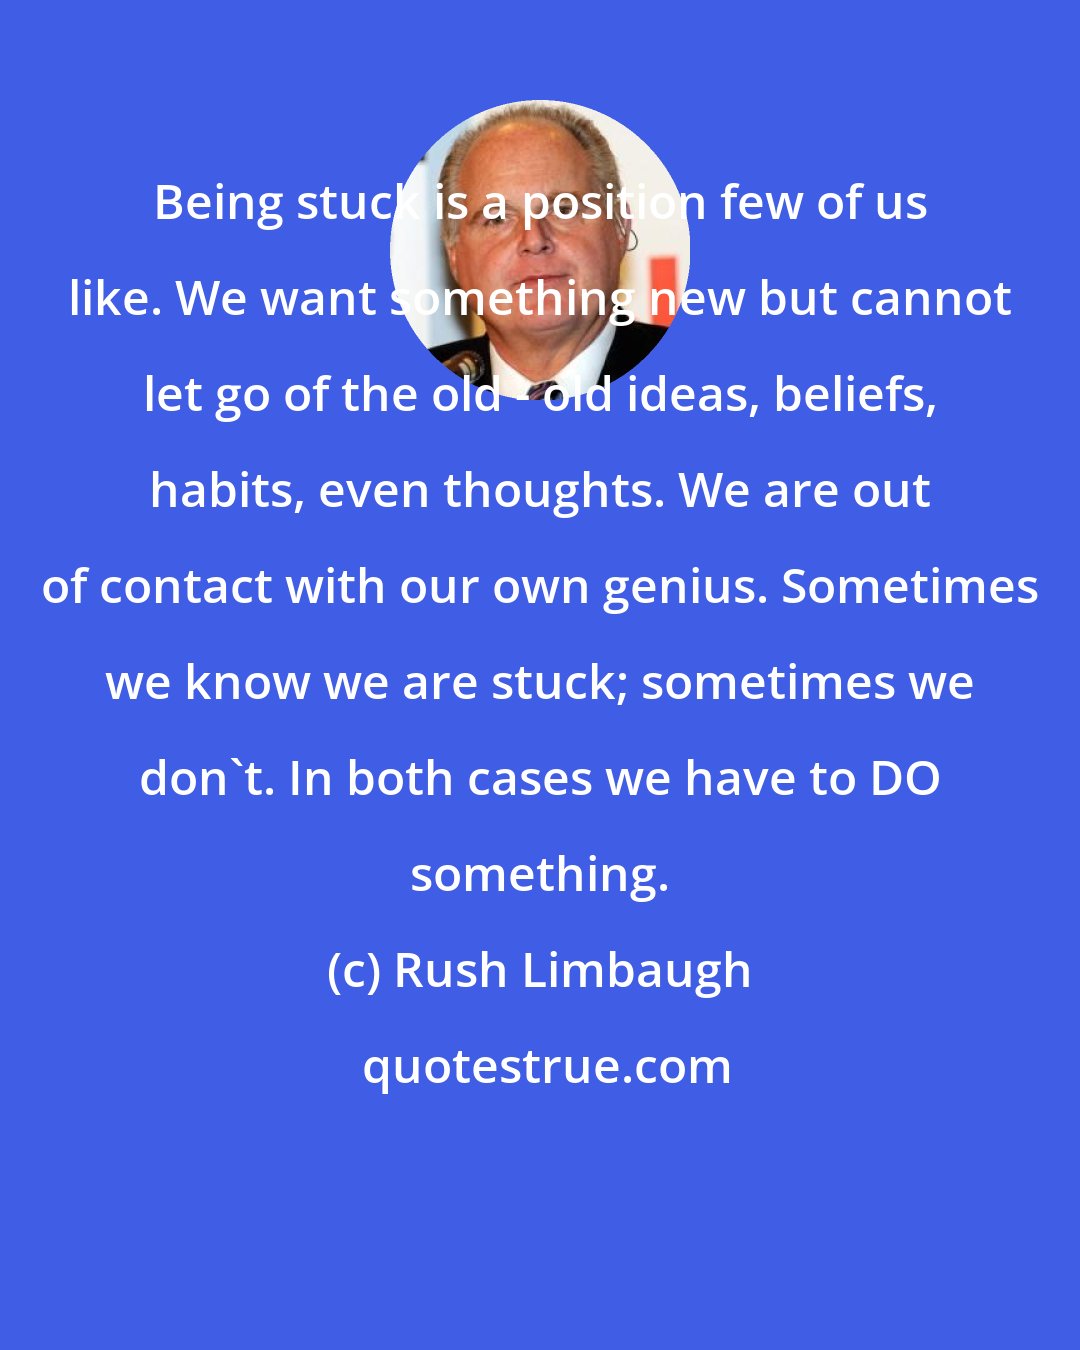 Rush Limbaugh: Being stuck is a position few of us like. We want something new but cannot let go of the old - old ideas, beliefs, habits, even thoughts. We are out of contact with our own genius. Sometimes we know we are stuck; sometimes we don't. In both cases we have to DO something.